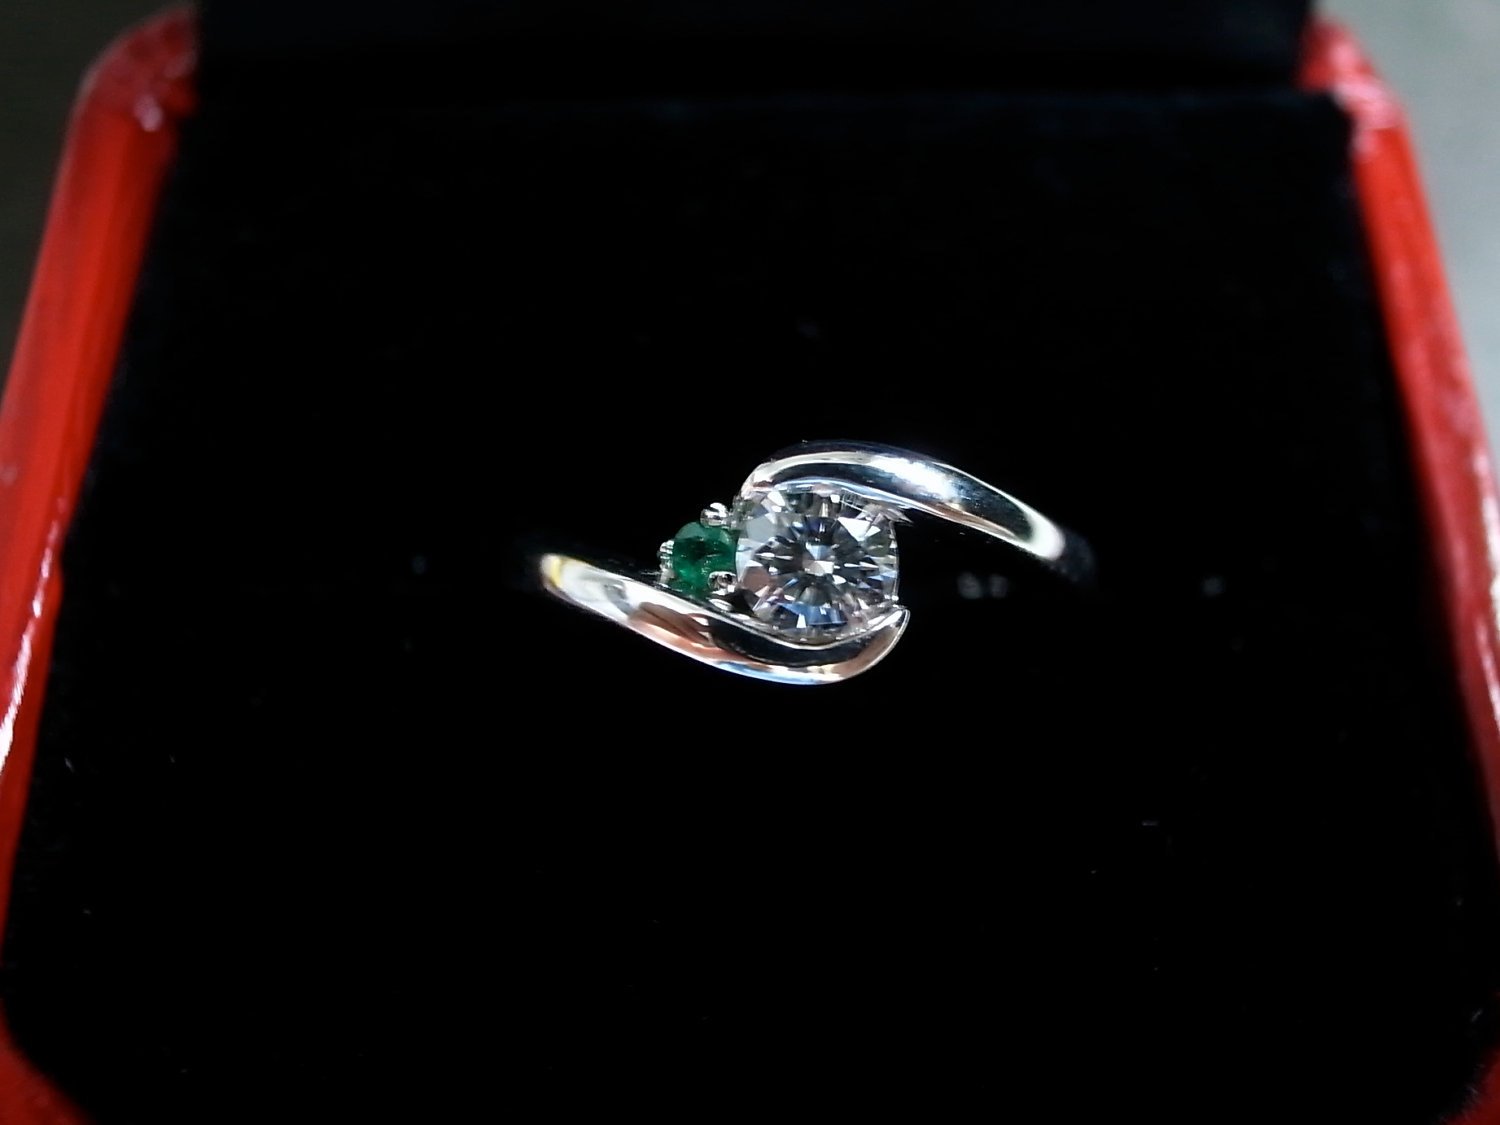 0.25ct Brilliant Cut Diamond and Emerald Engagement Ring in 18K White Gold - HN JEWELRY